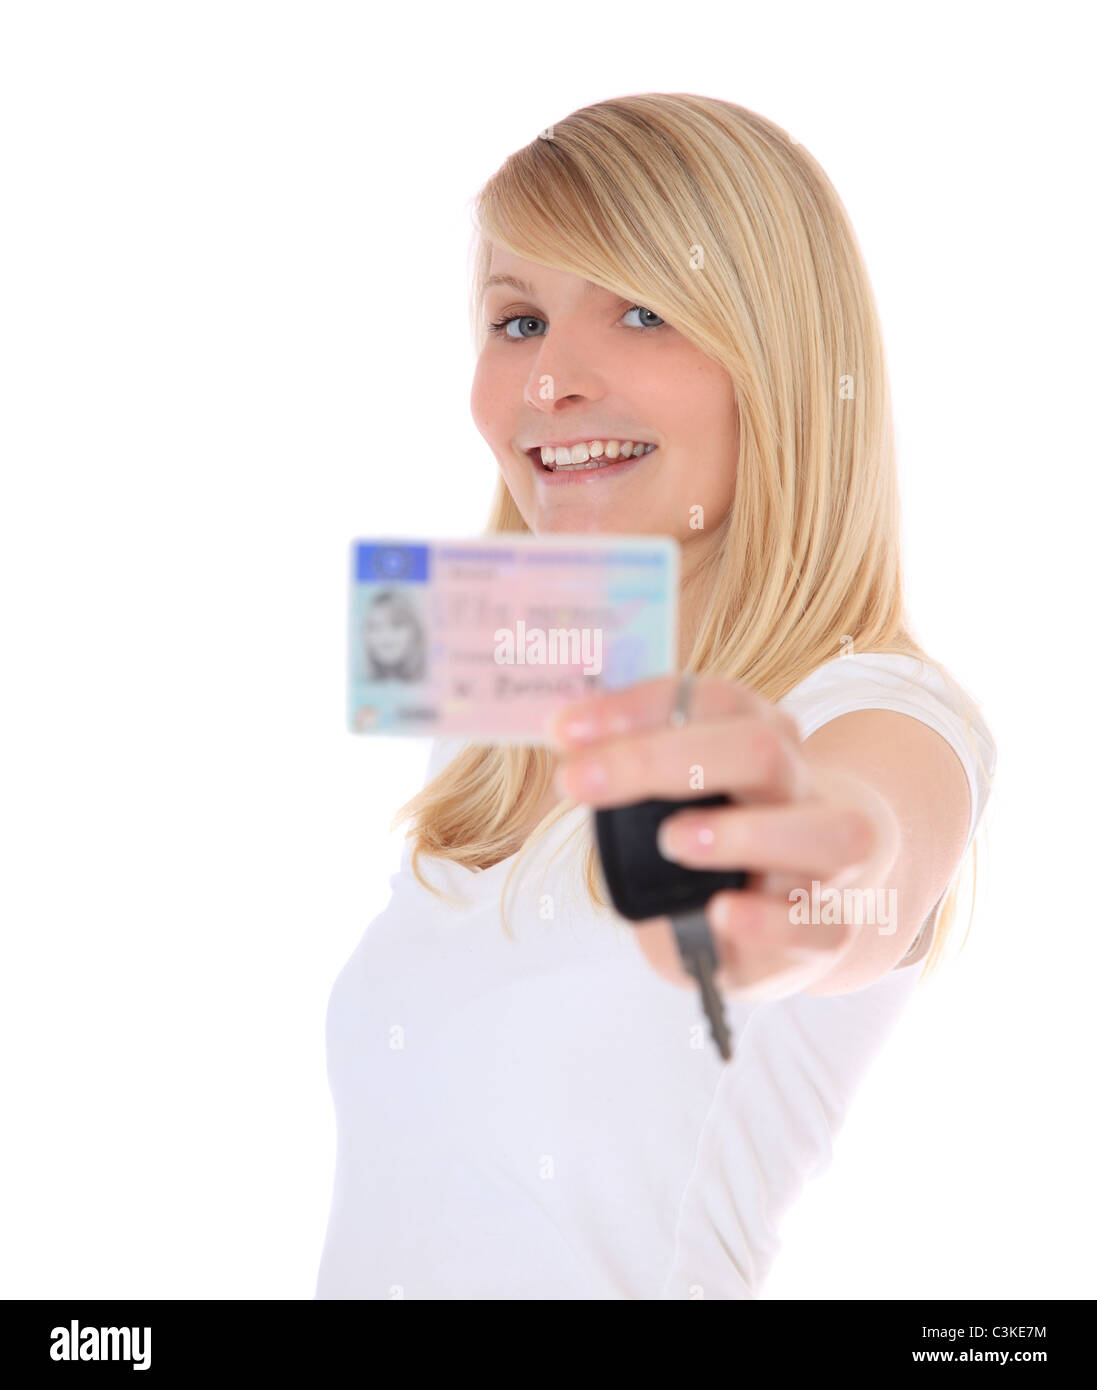 Attractive young woman proudly showing her european driver license. All on white background. Stock Photo